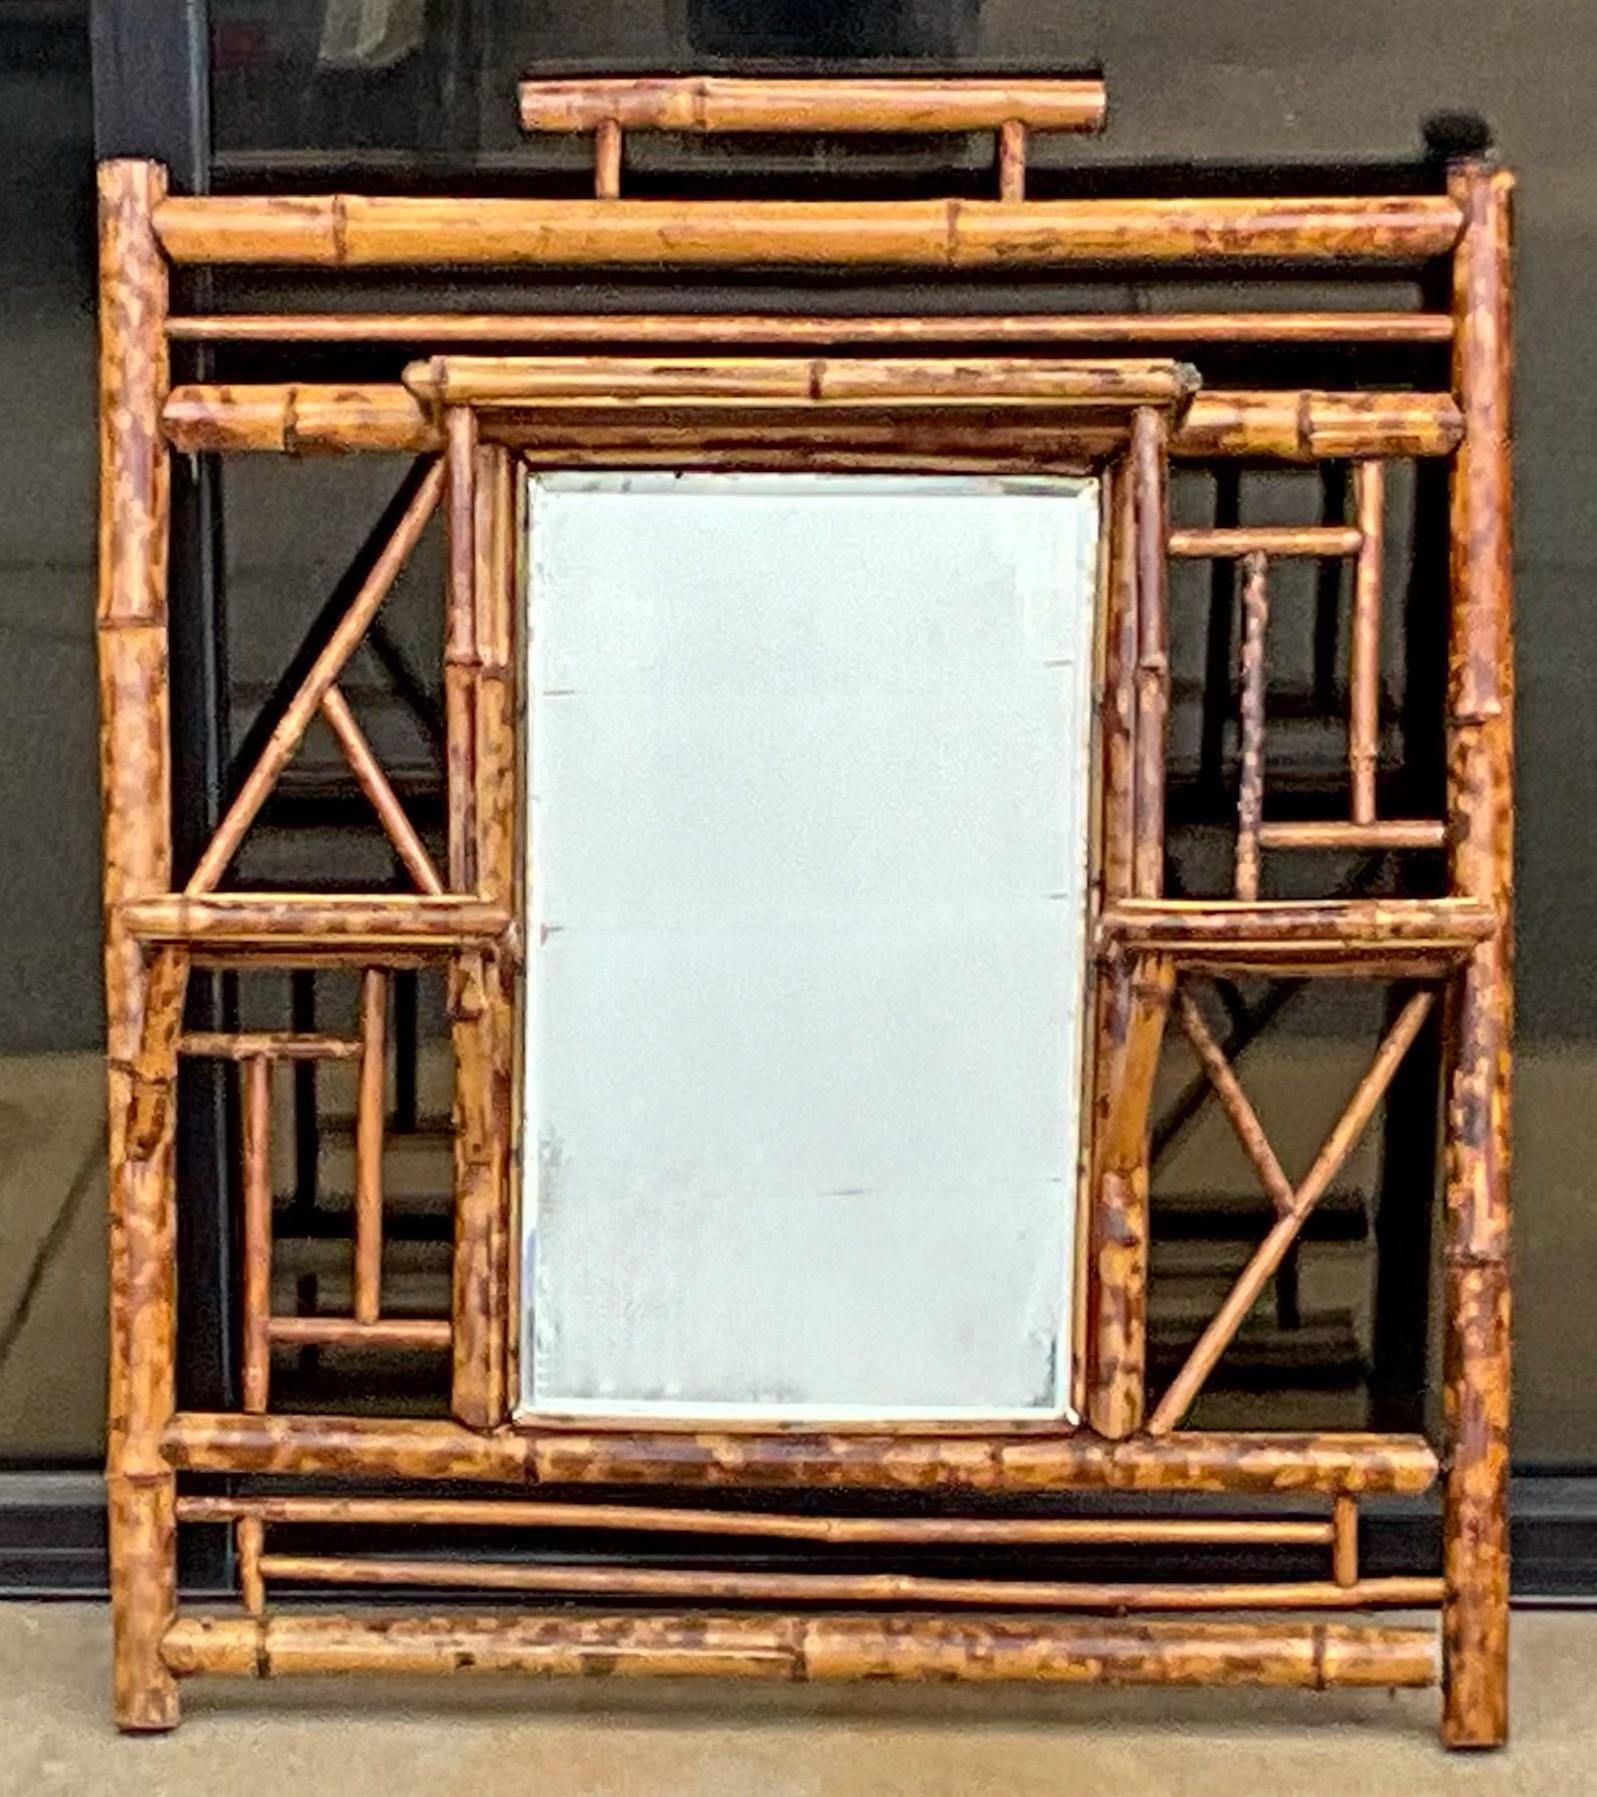 19th-C. English Aesthetic Movement Bamboo & Lacquer Wall Shelf W/ Mirror For Sale